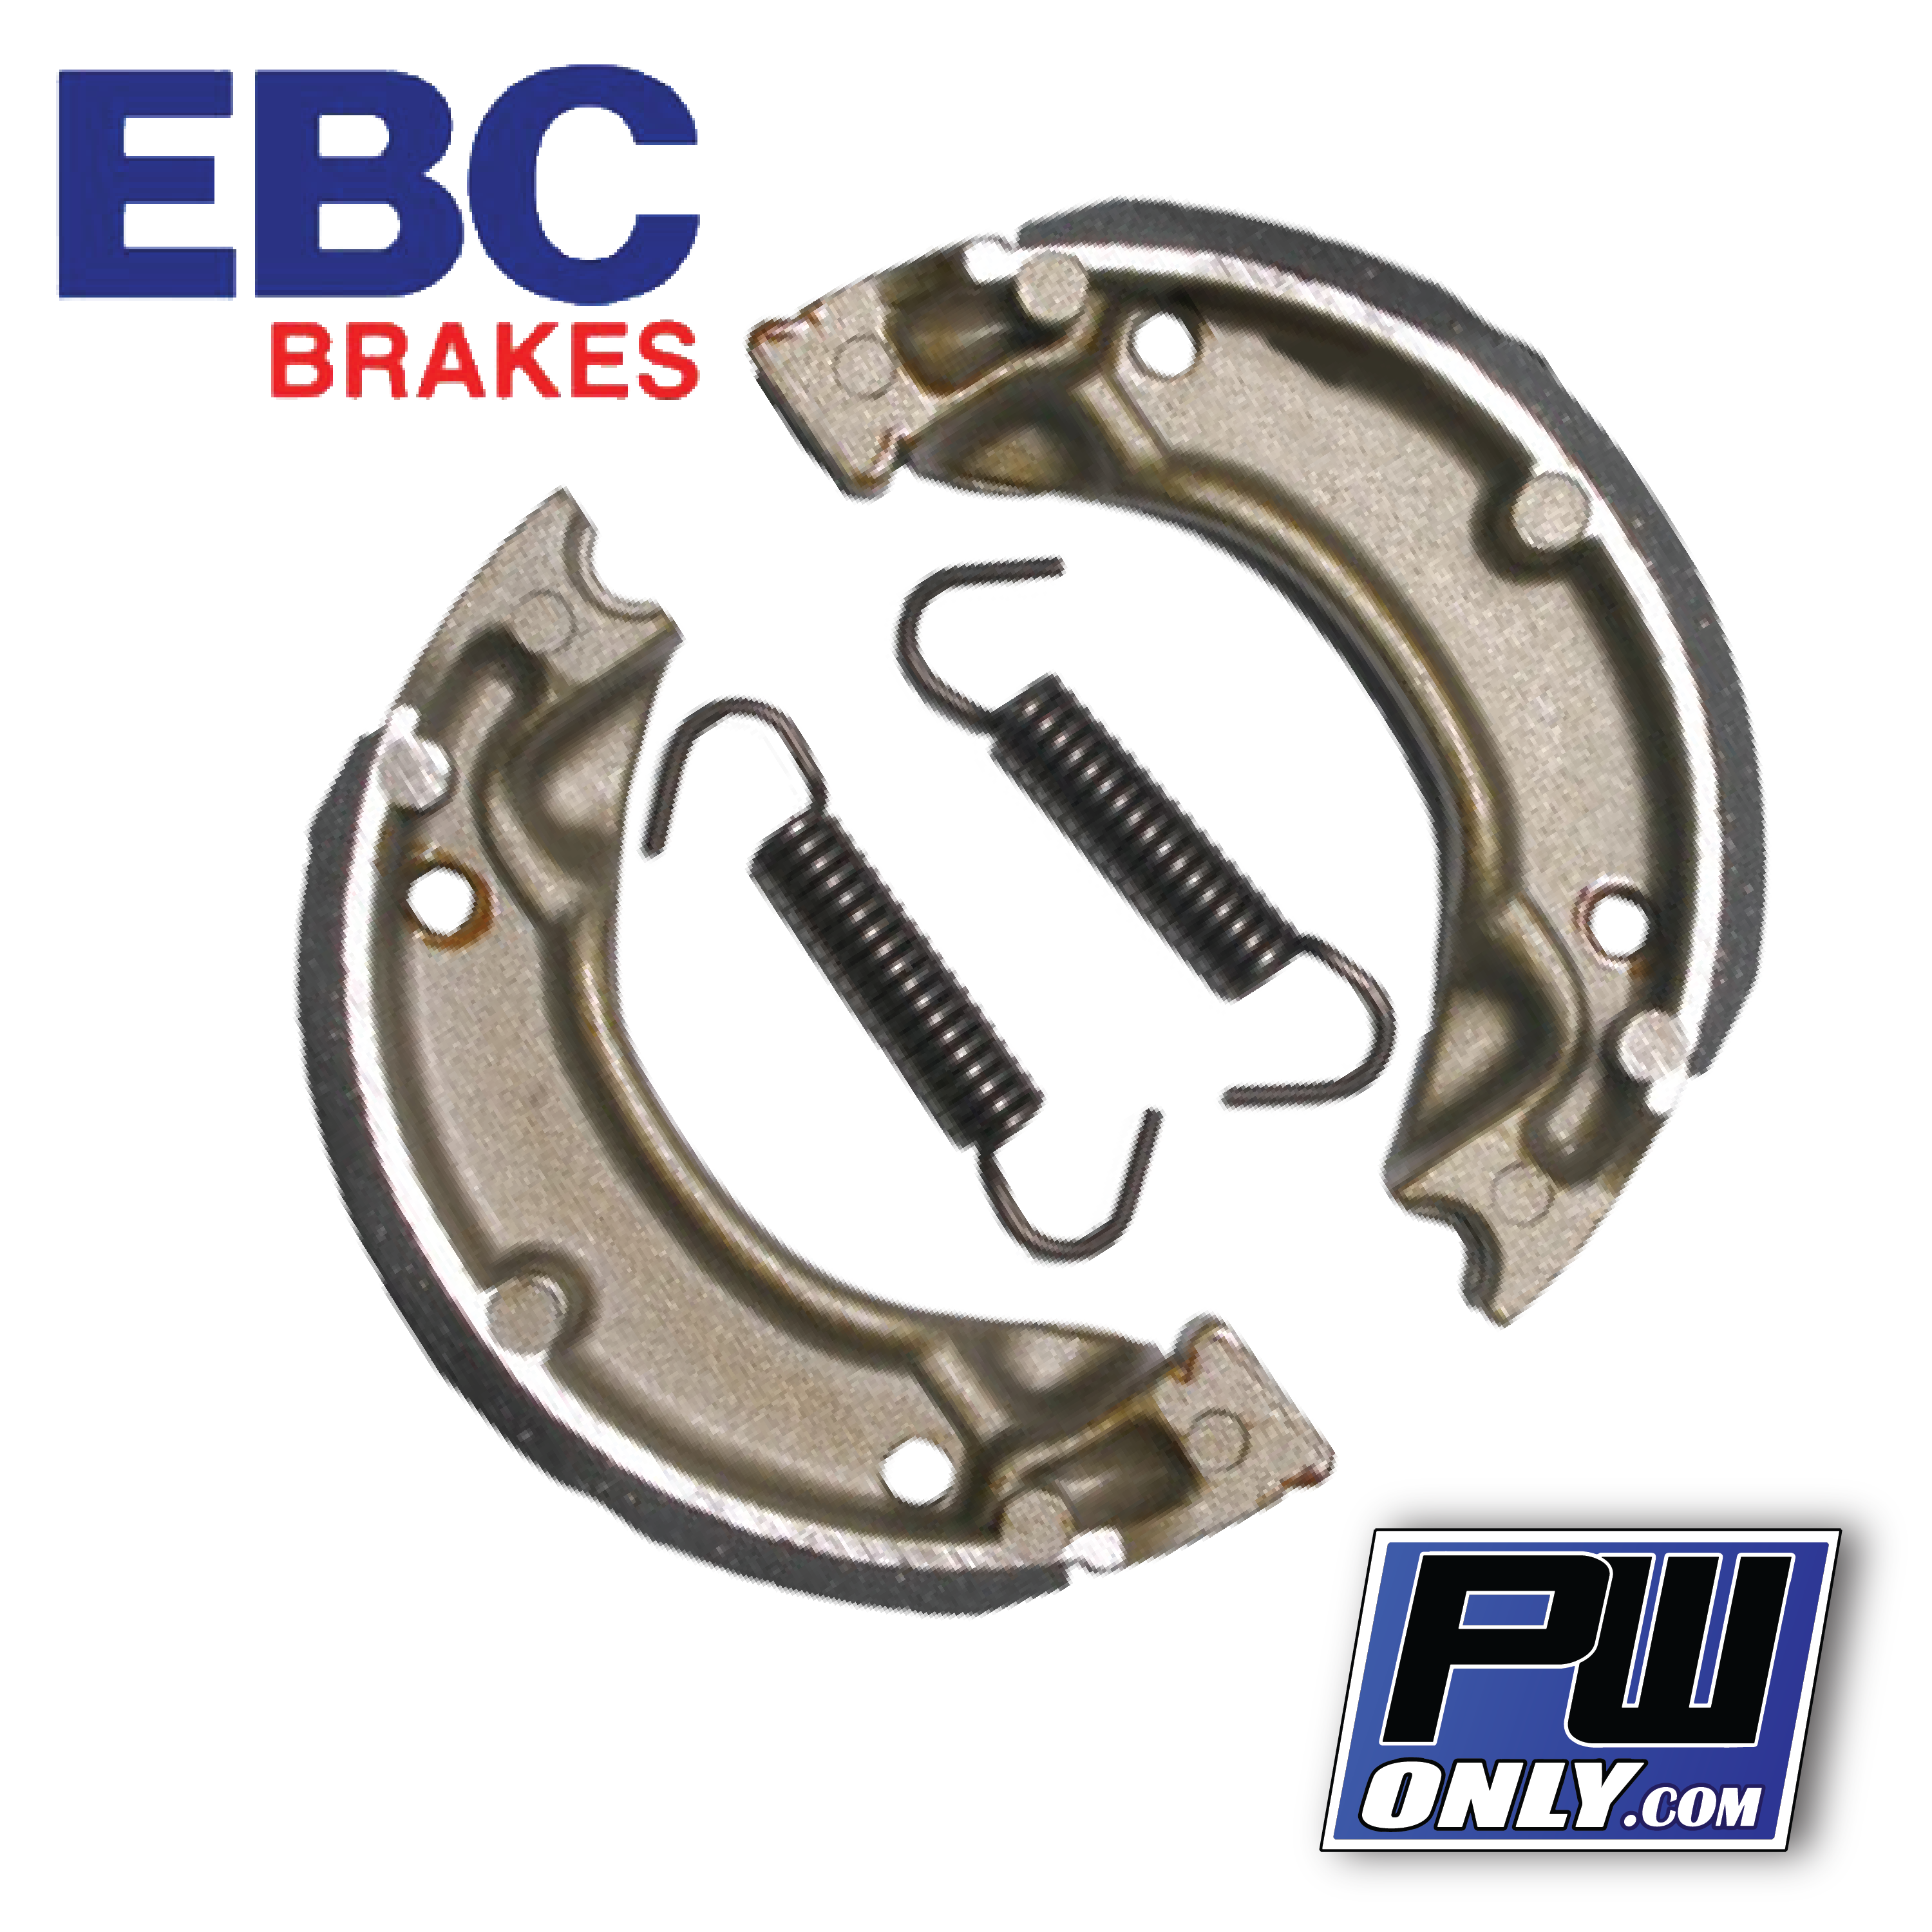 Details about  / Rear Brake Shoes Fit YAMAHA PW80 2006 2007 2008 2009 2010 2011 2012 2013 S4S